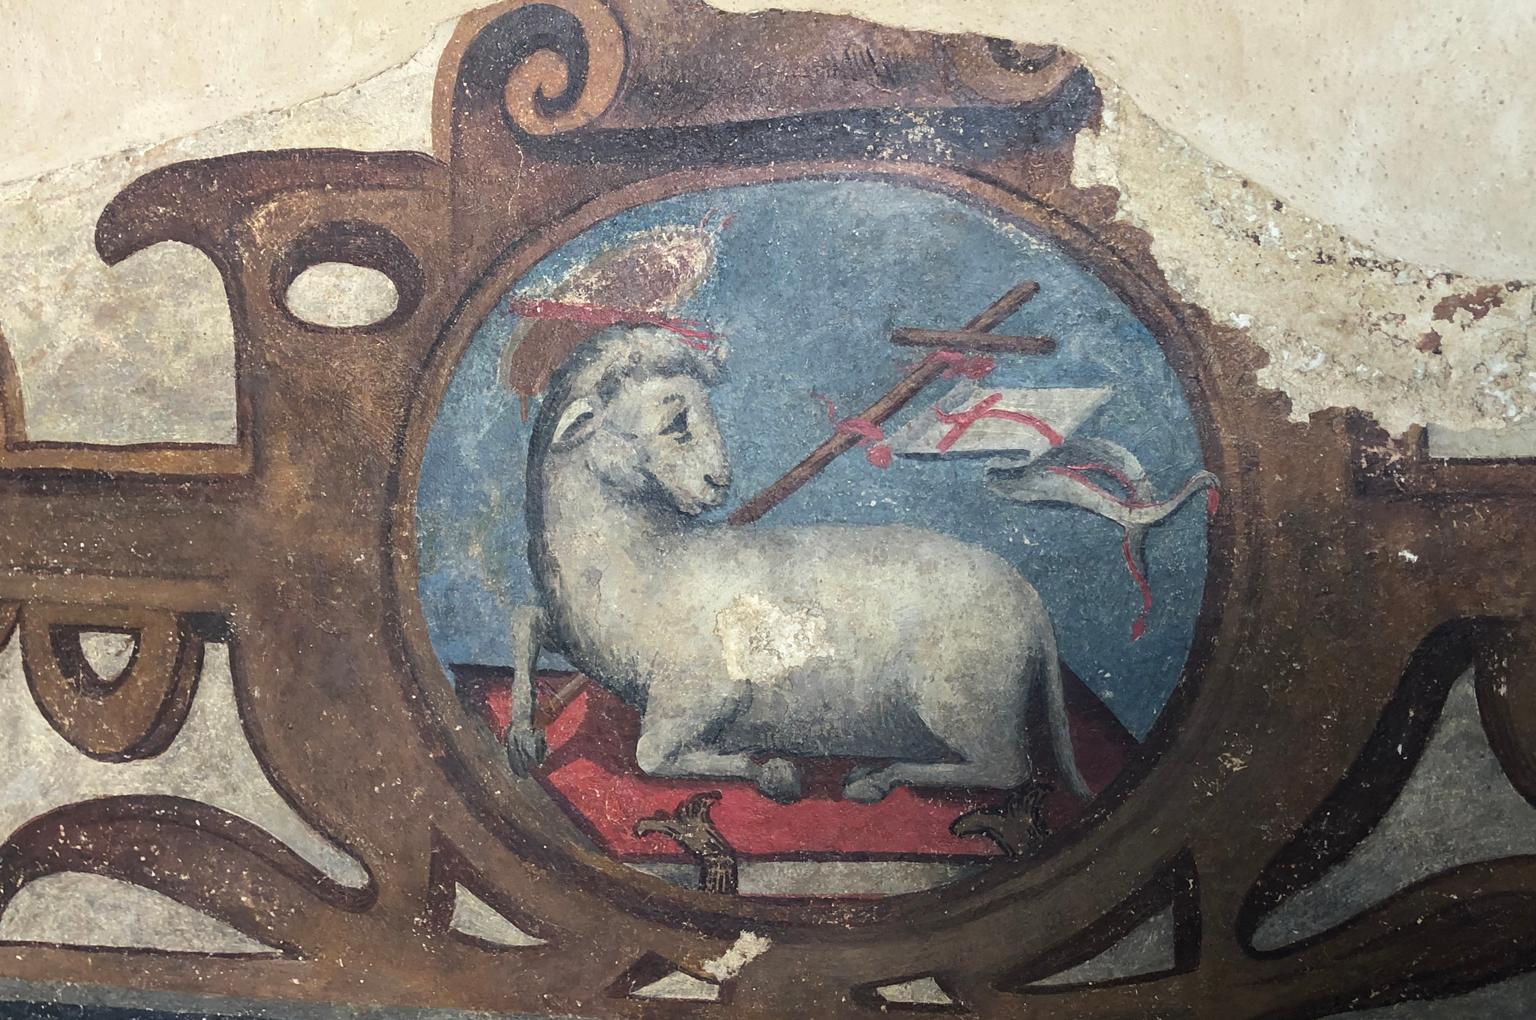 A stunning 16th century Fresco Fragment, now mounted on wood, from the Aragon region of Spain. Wonderful color and motif of the Lamb of God - Angus Dei.